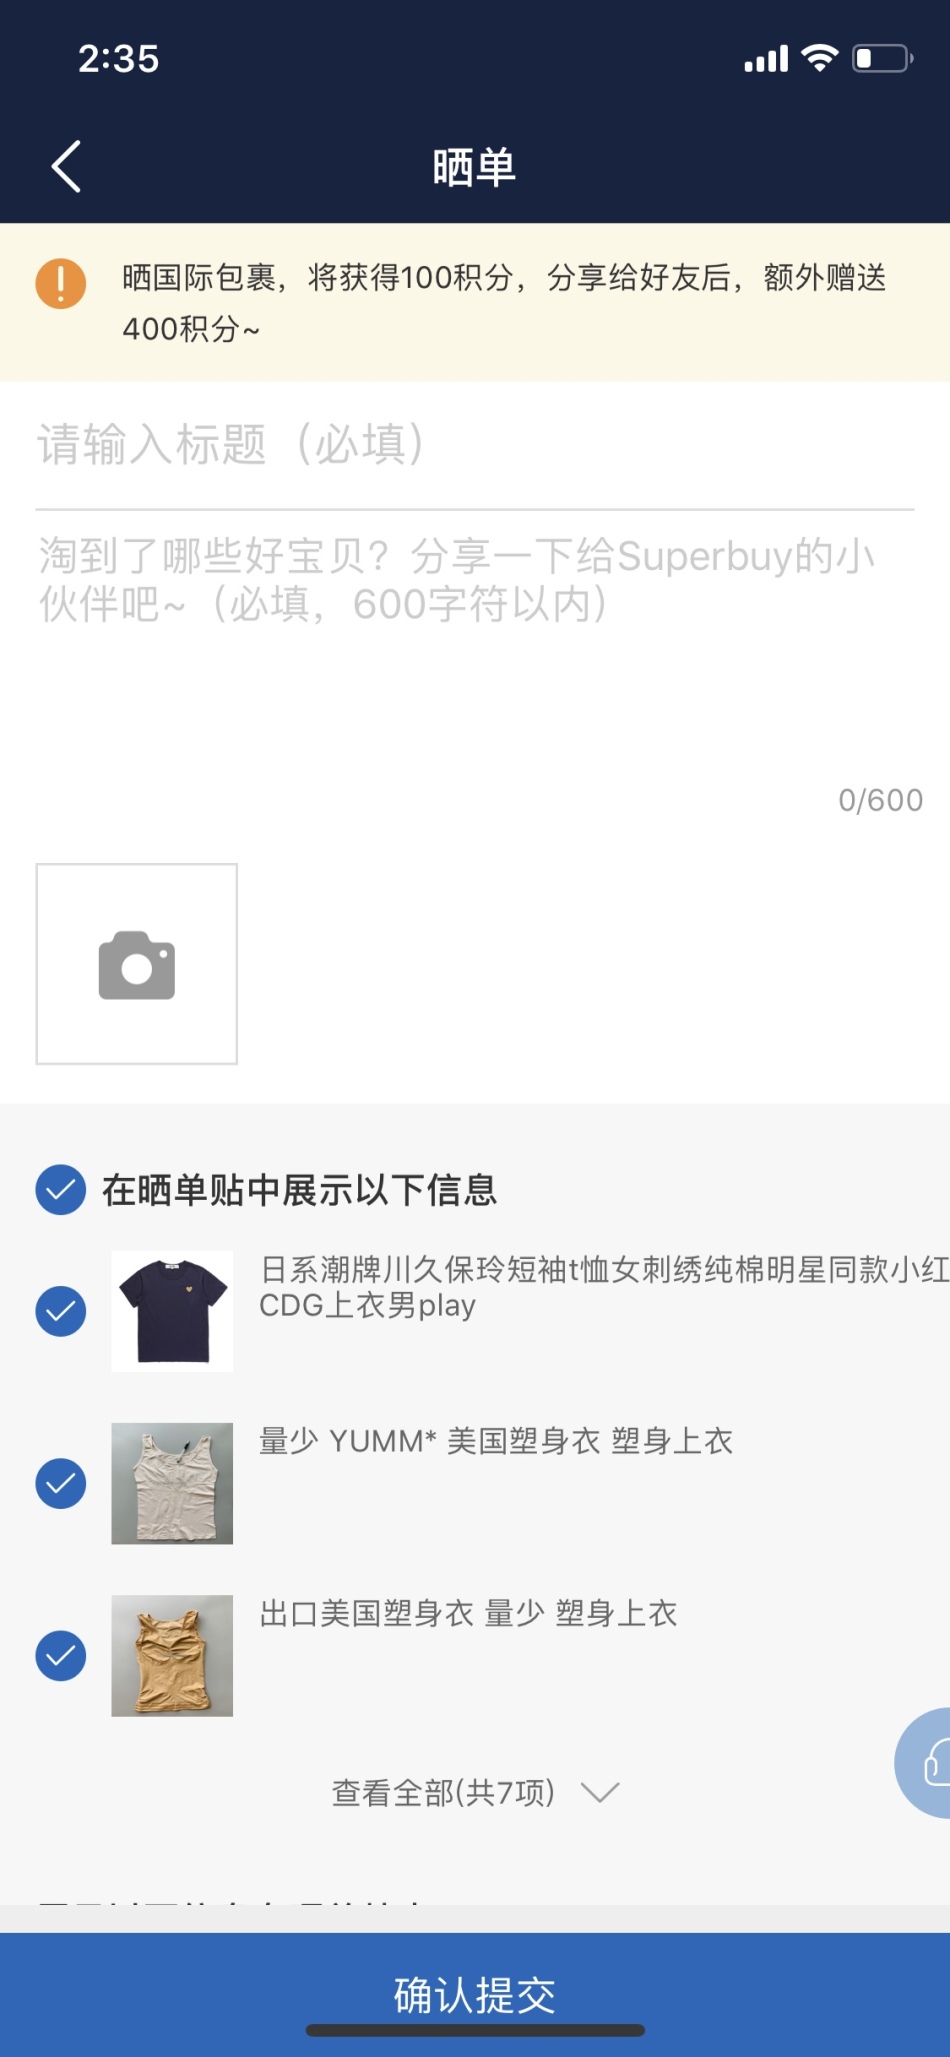 https://img1.superbuy.com/images/consult/2019/07/30/9641ca69fedcb0616a0bbde107073ee5.jpg?x-oss-process=image/resize,w_950